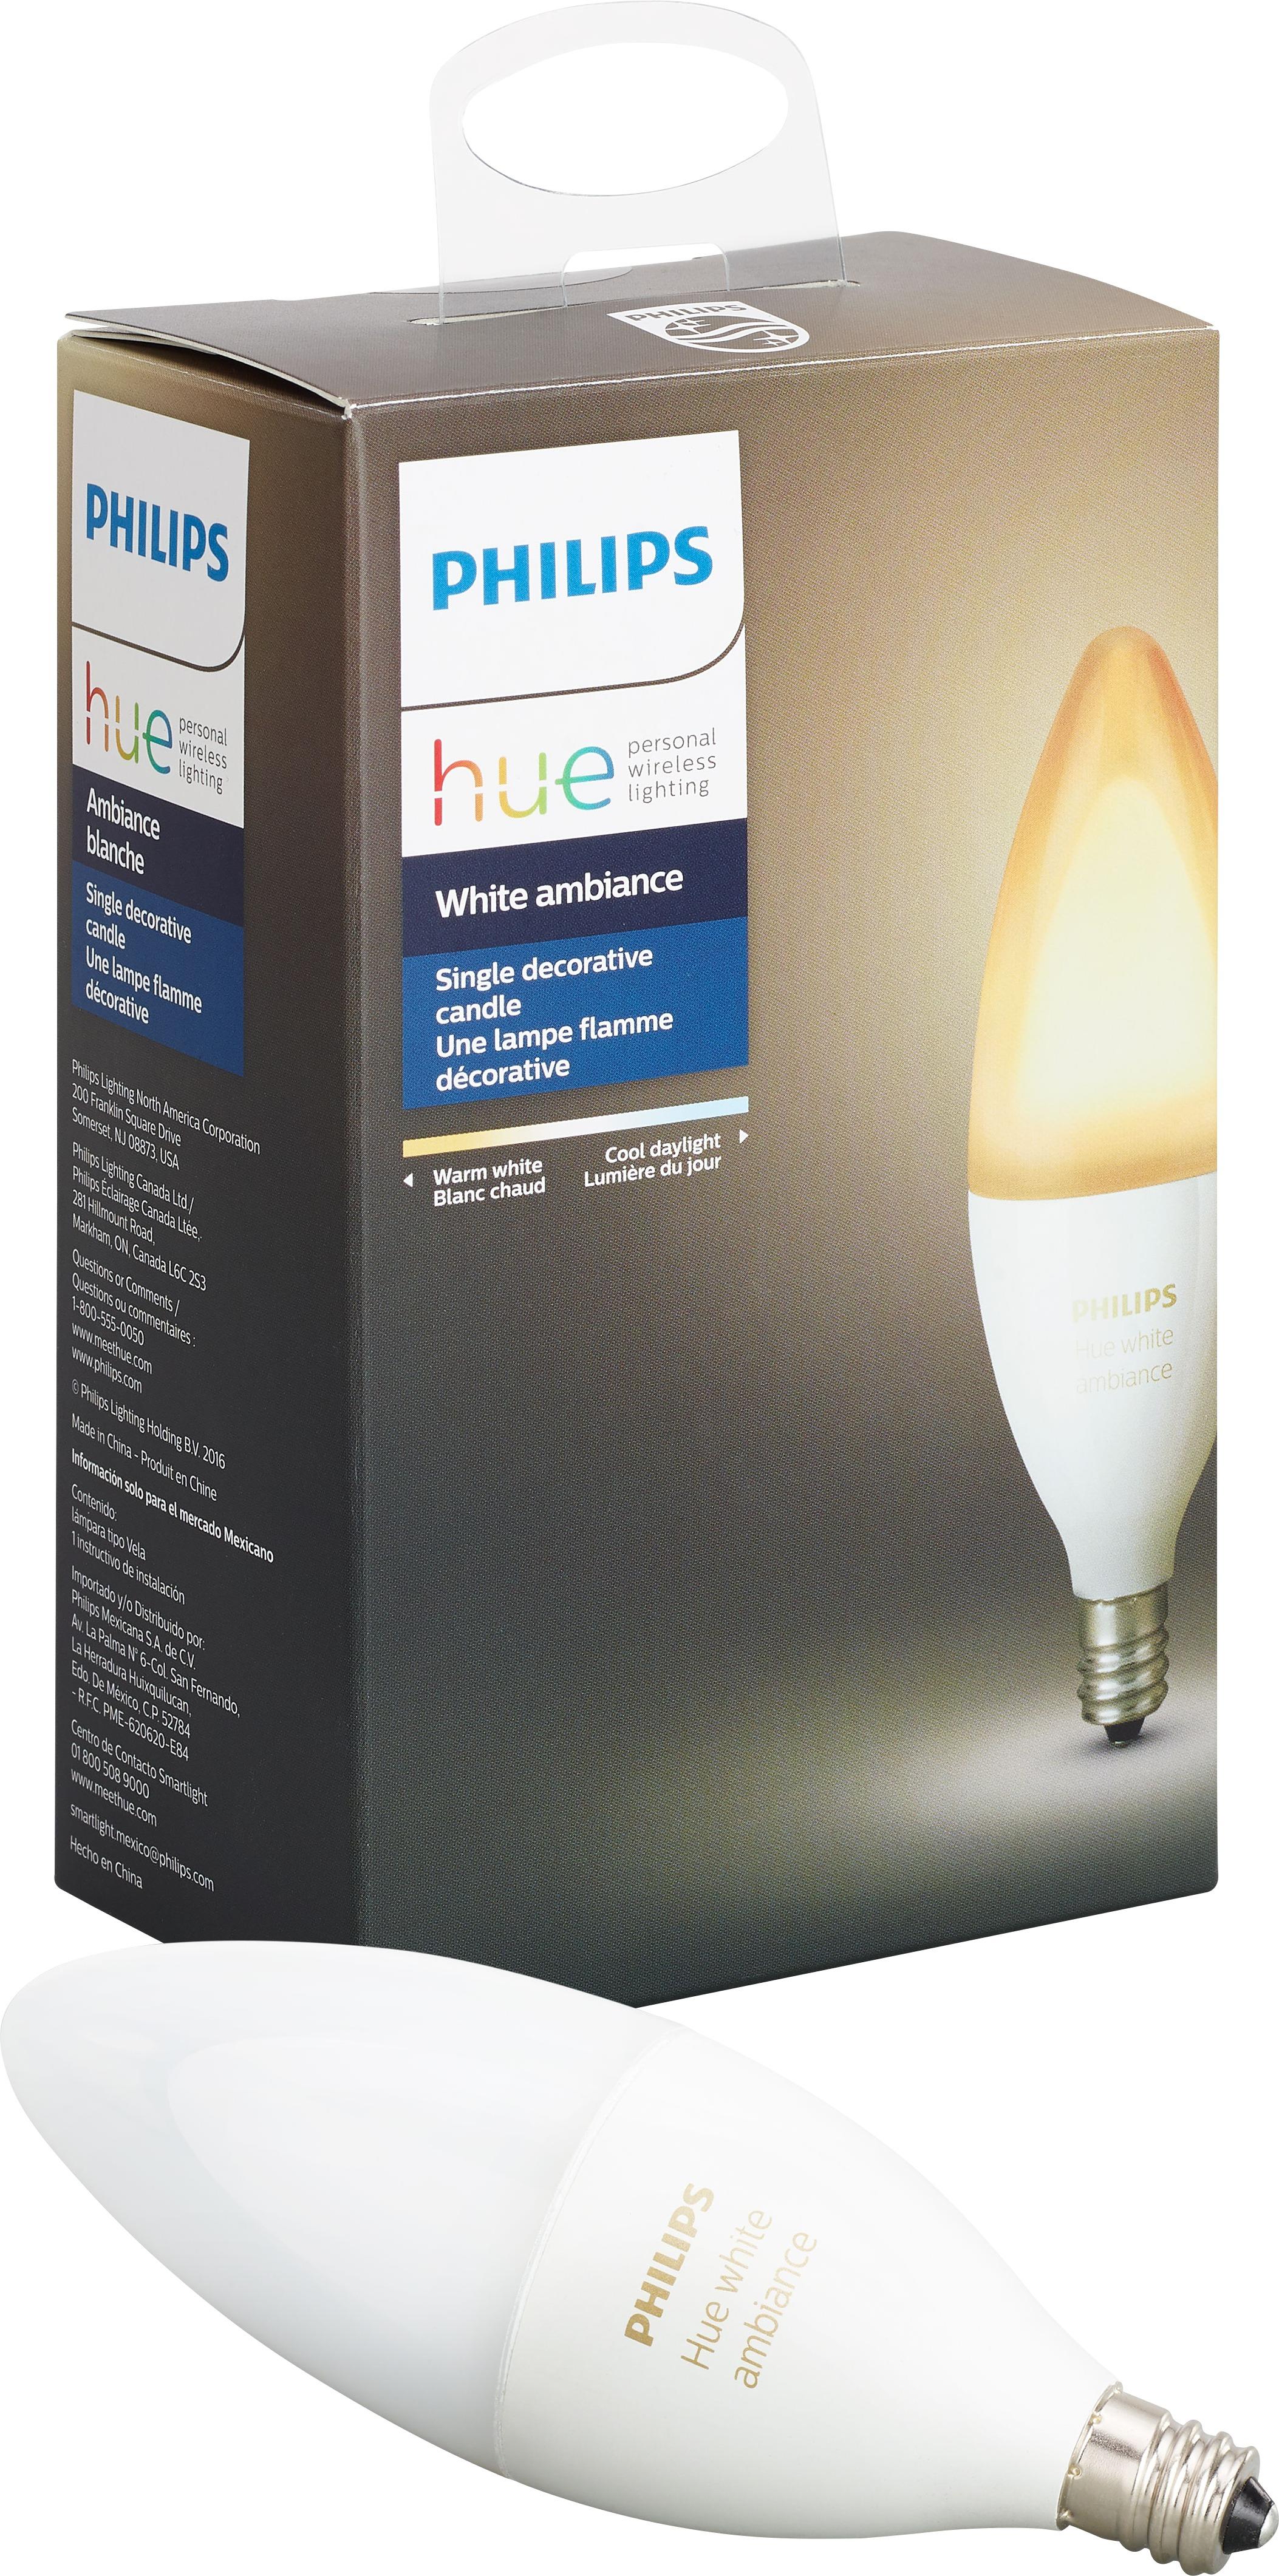 Philips - Hue White Ambiance E12 Wi-Fi Smart LED Decorative Candle Bulb - White was $24.99 now $19.99 (20.0% off)